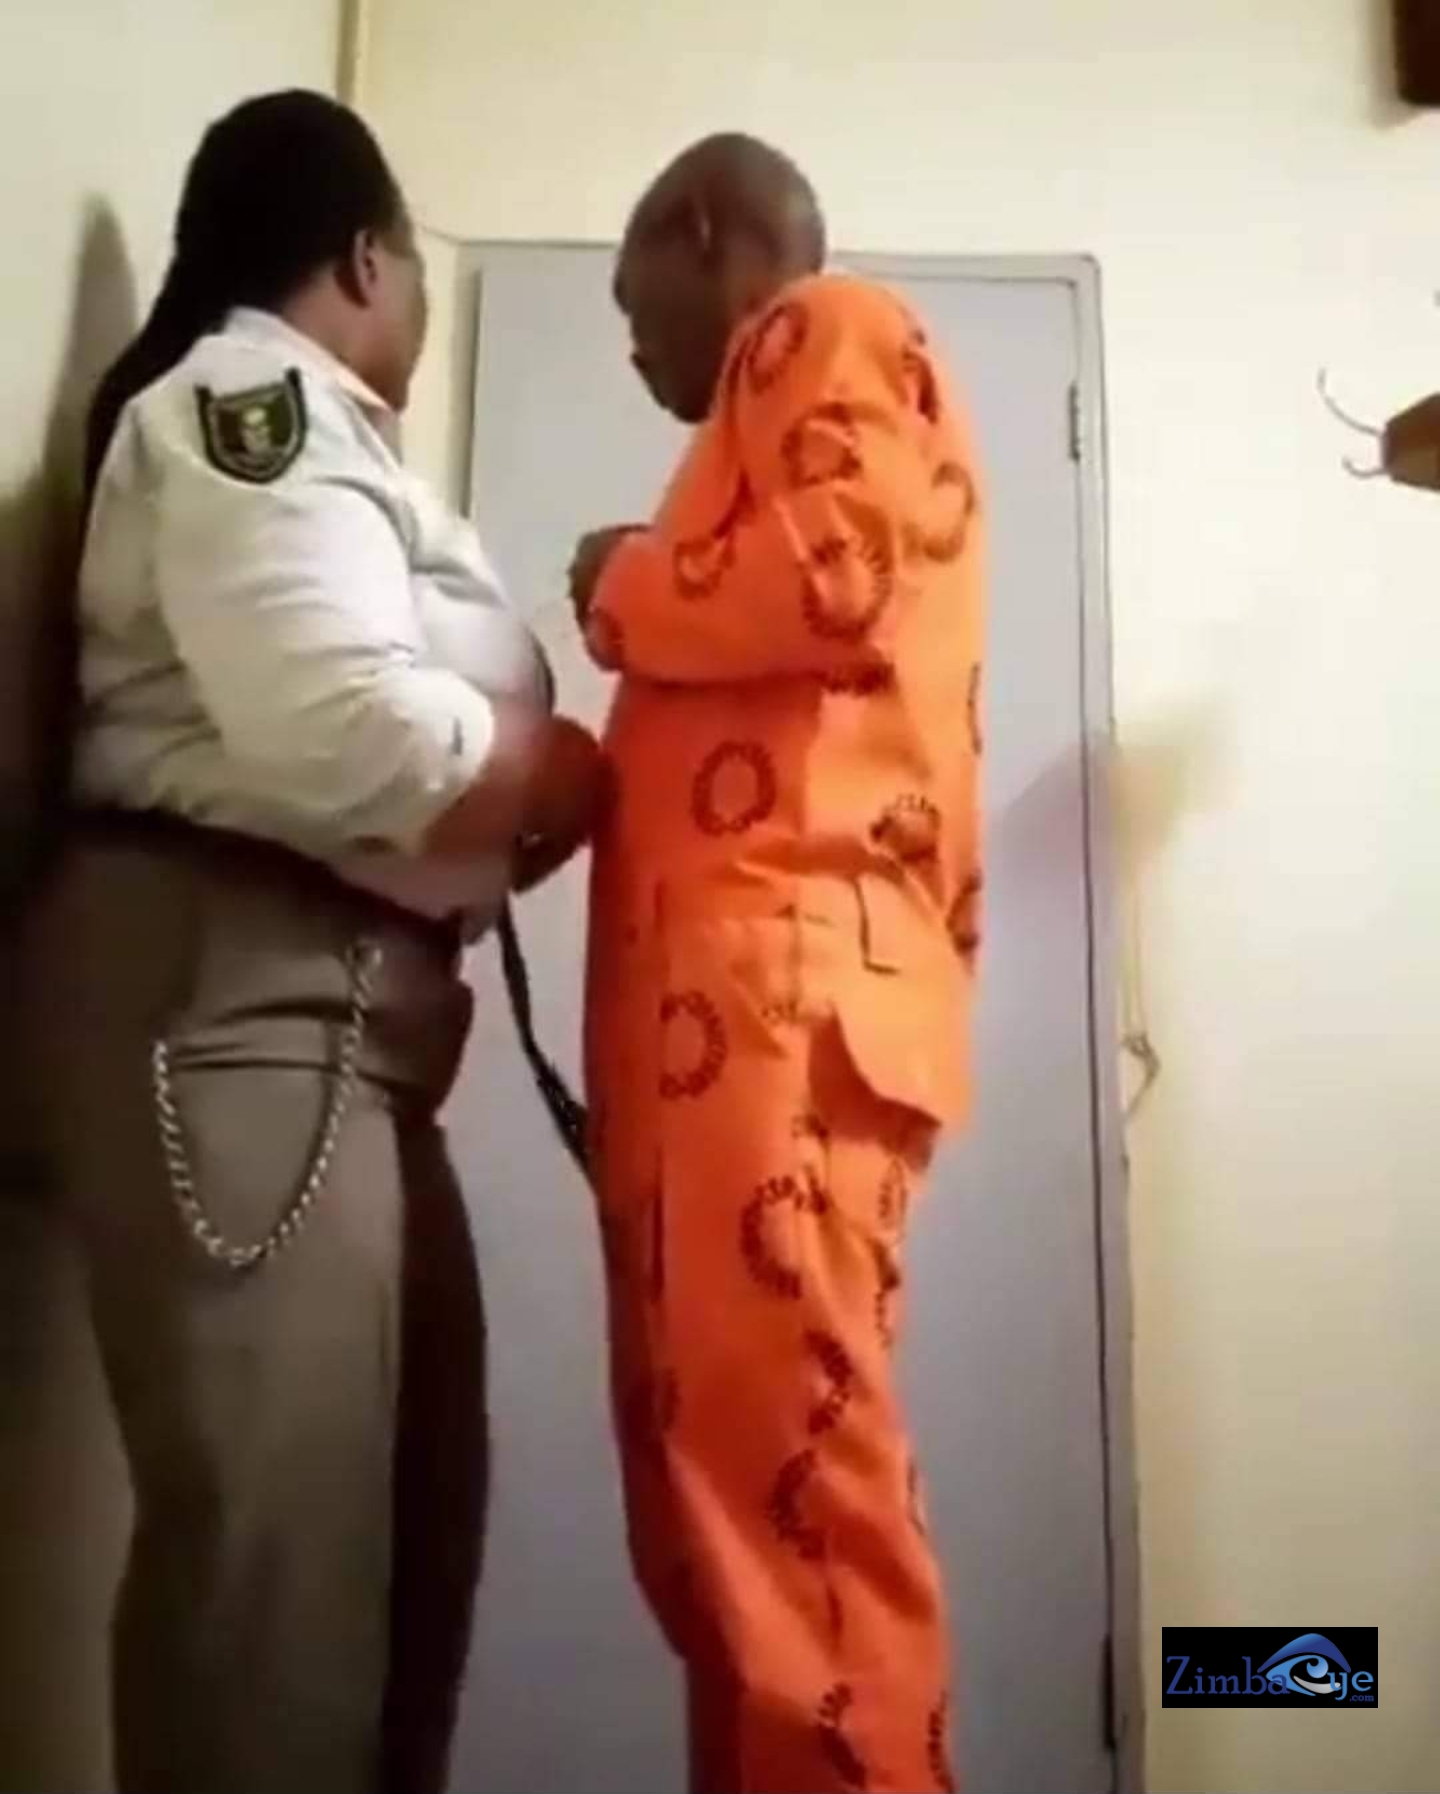 Viral Video Of Prison Warder Having Lula Lula With An Inmate 